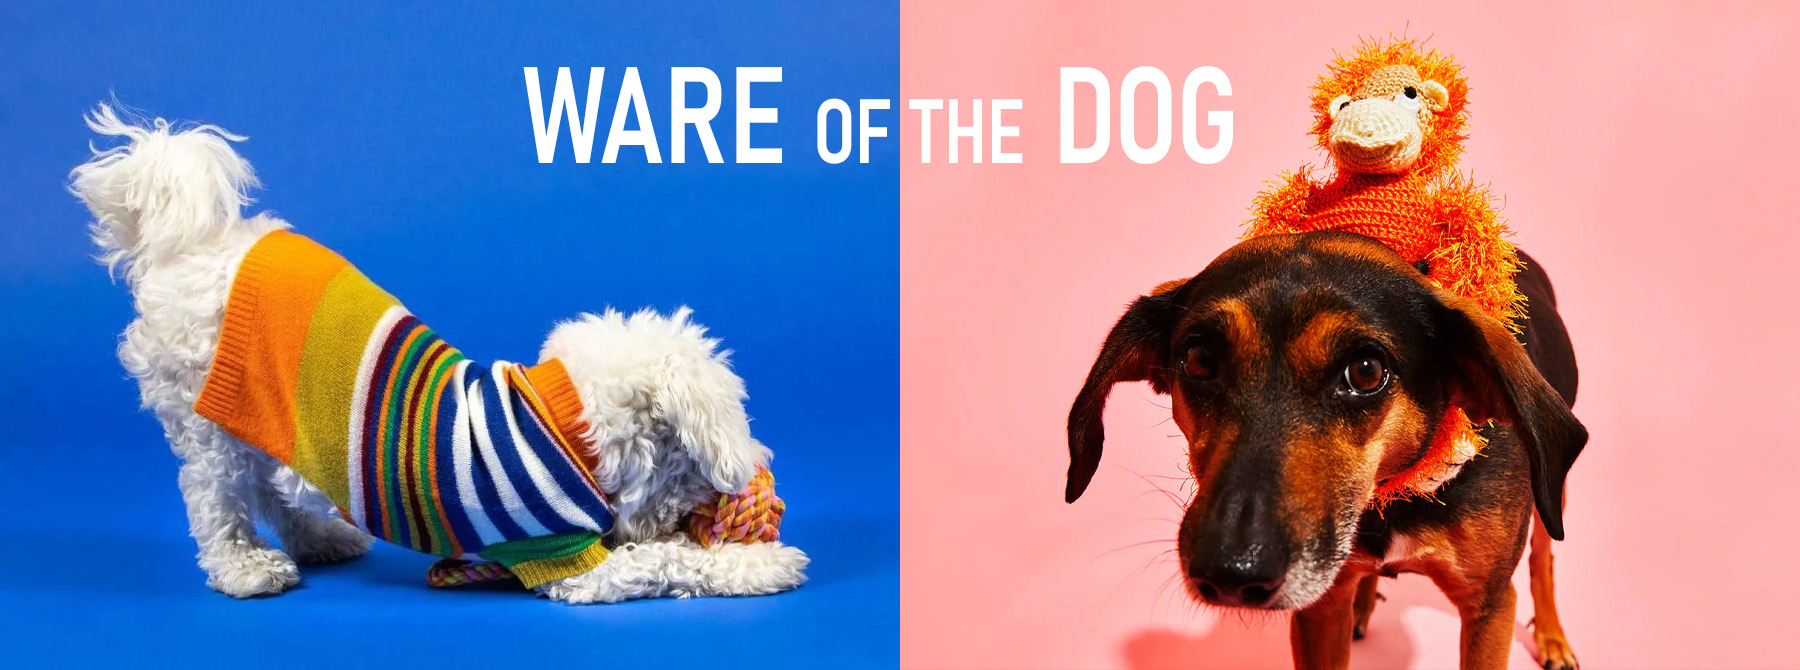 Ware of the Dog